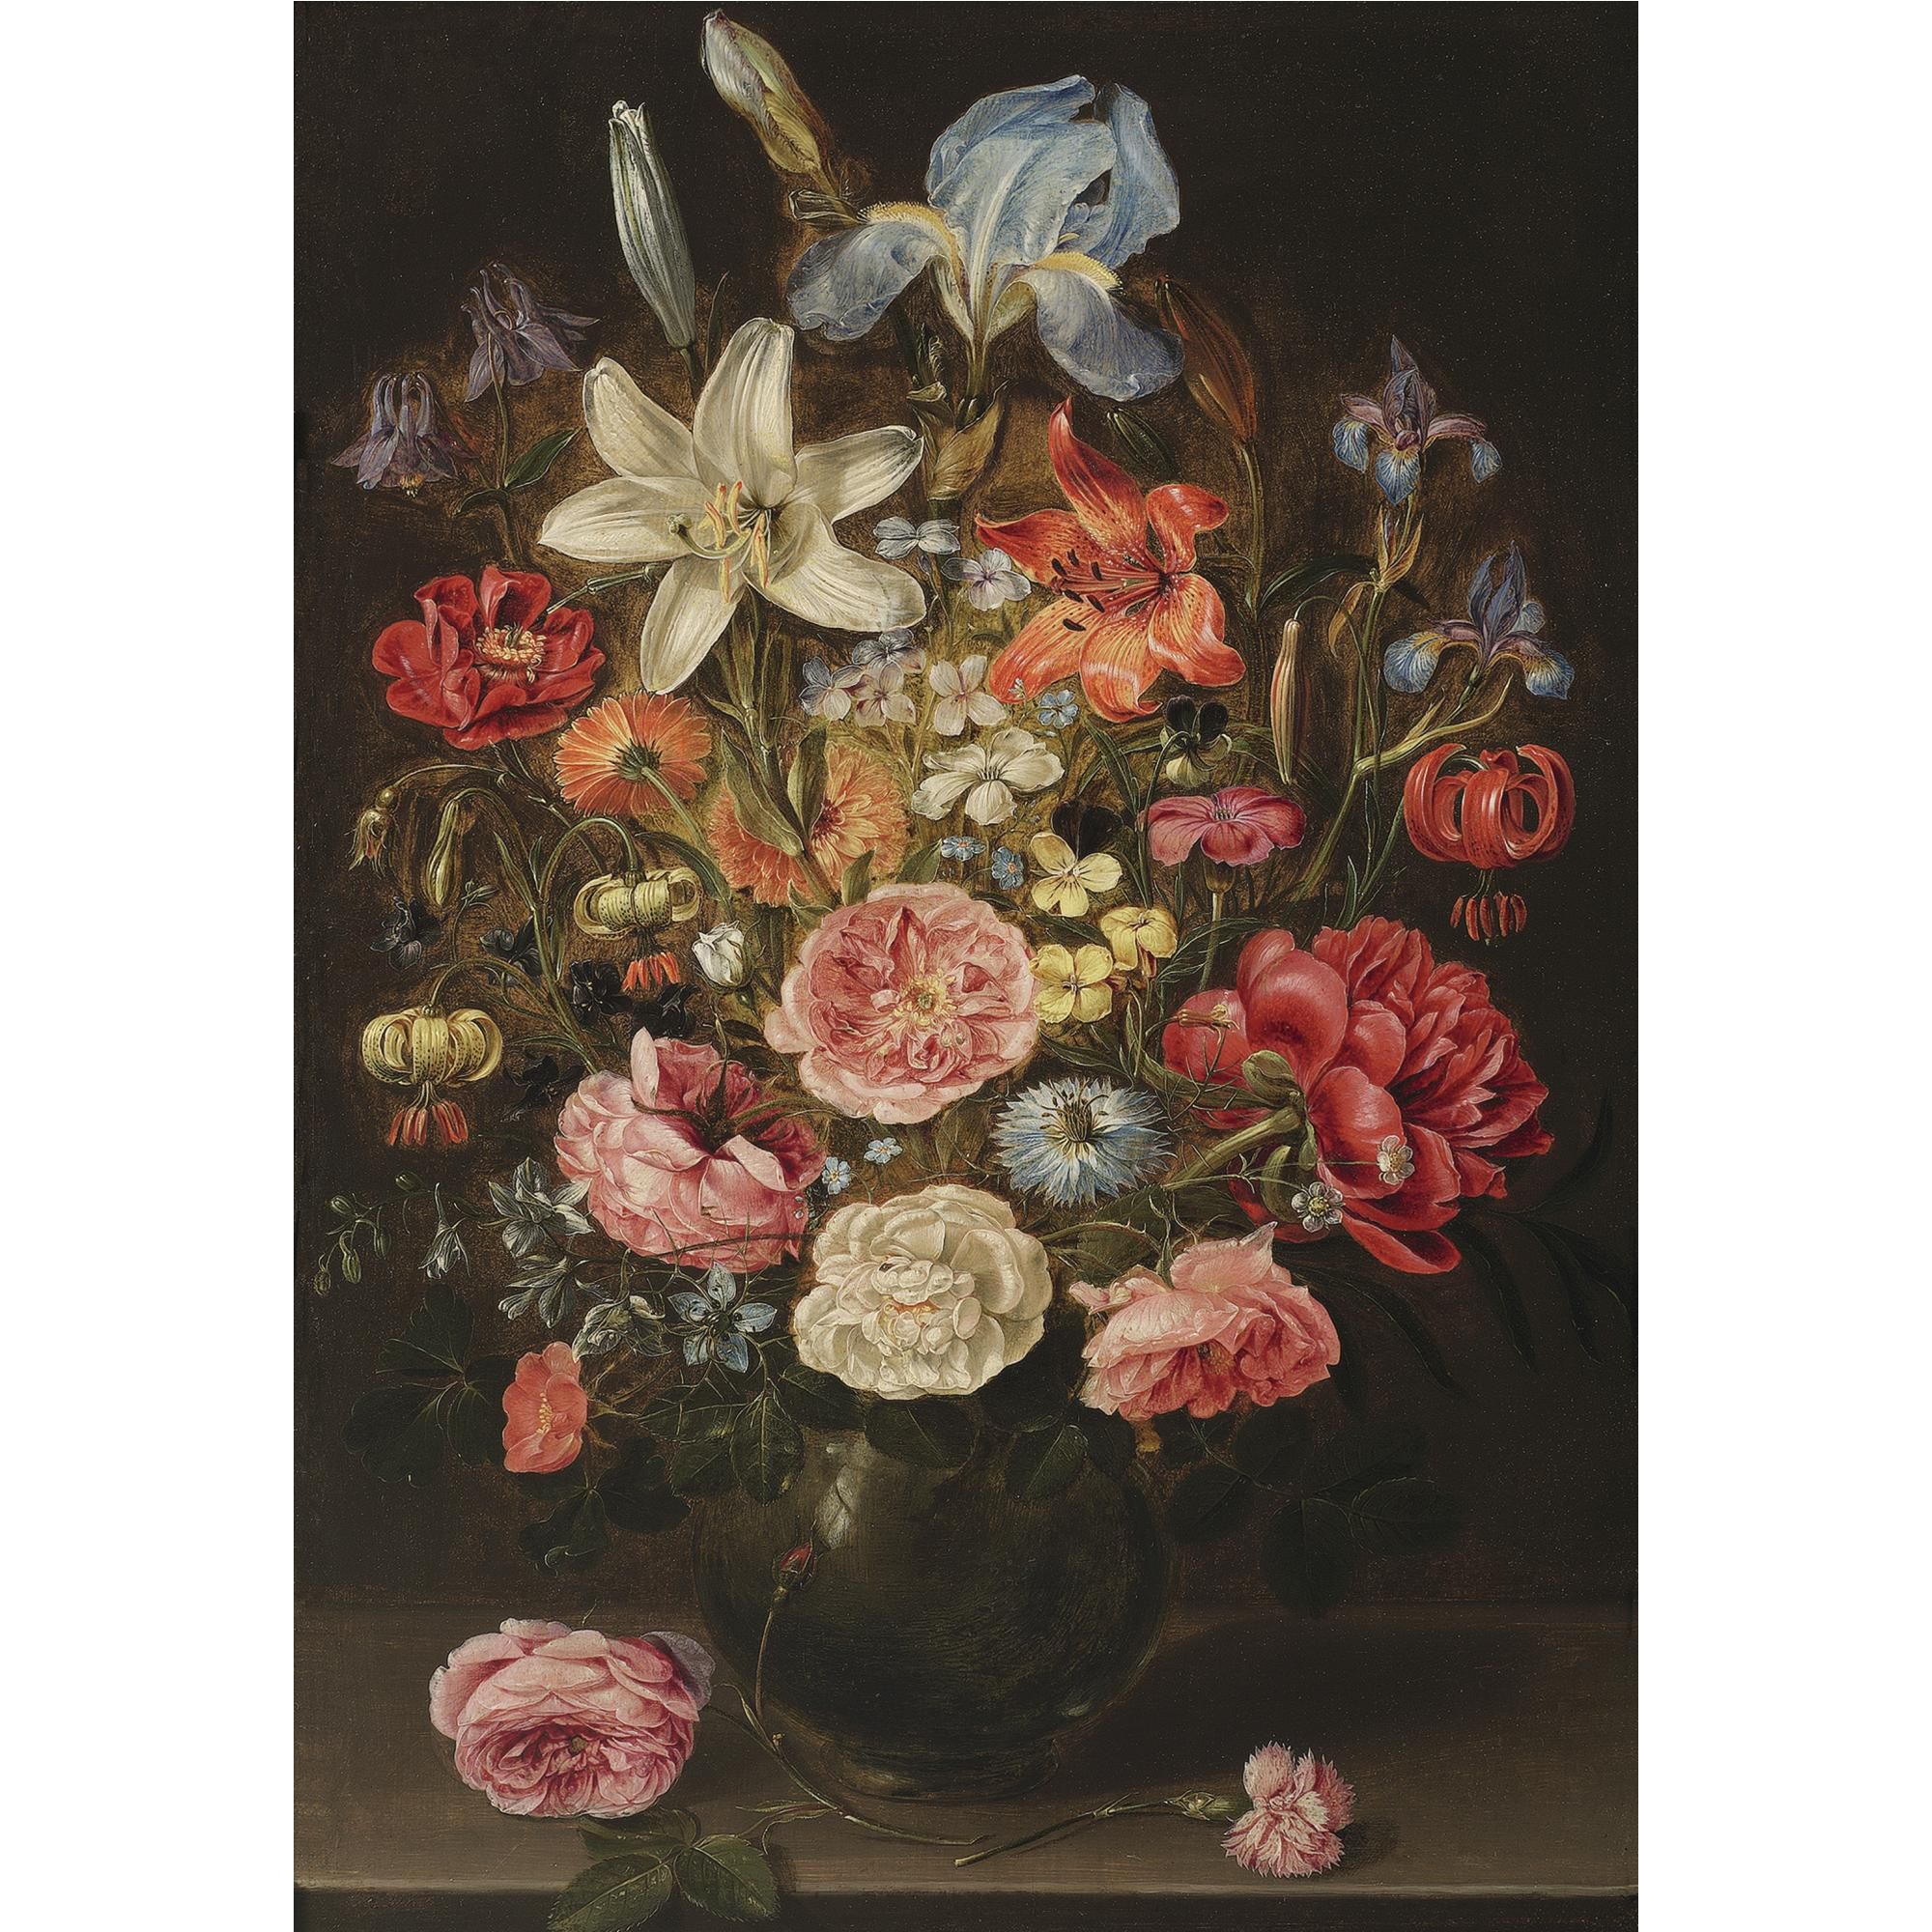 Clara Peeters, A still life of lilies, roses, iris, pansies, columbine,  love-in-a-mist, larkspur and other flowers in a glass vase on a table top,  flanked by a rose and a carnation